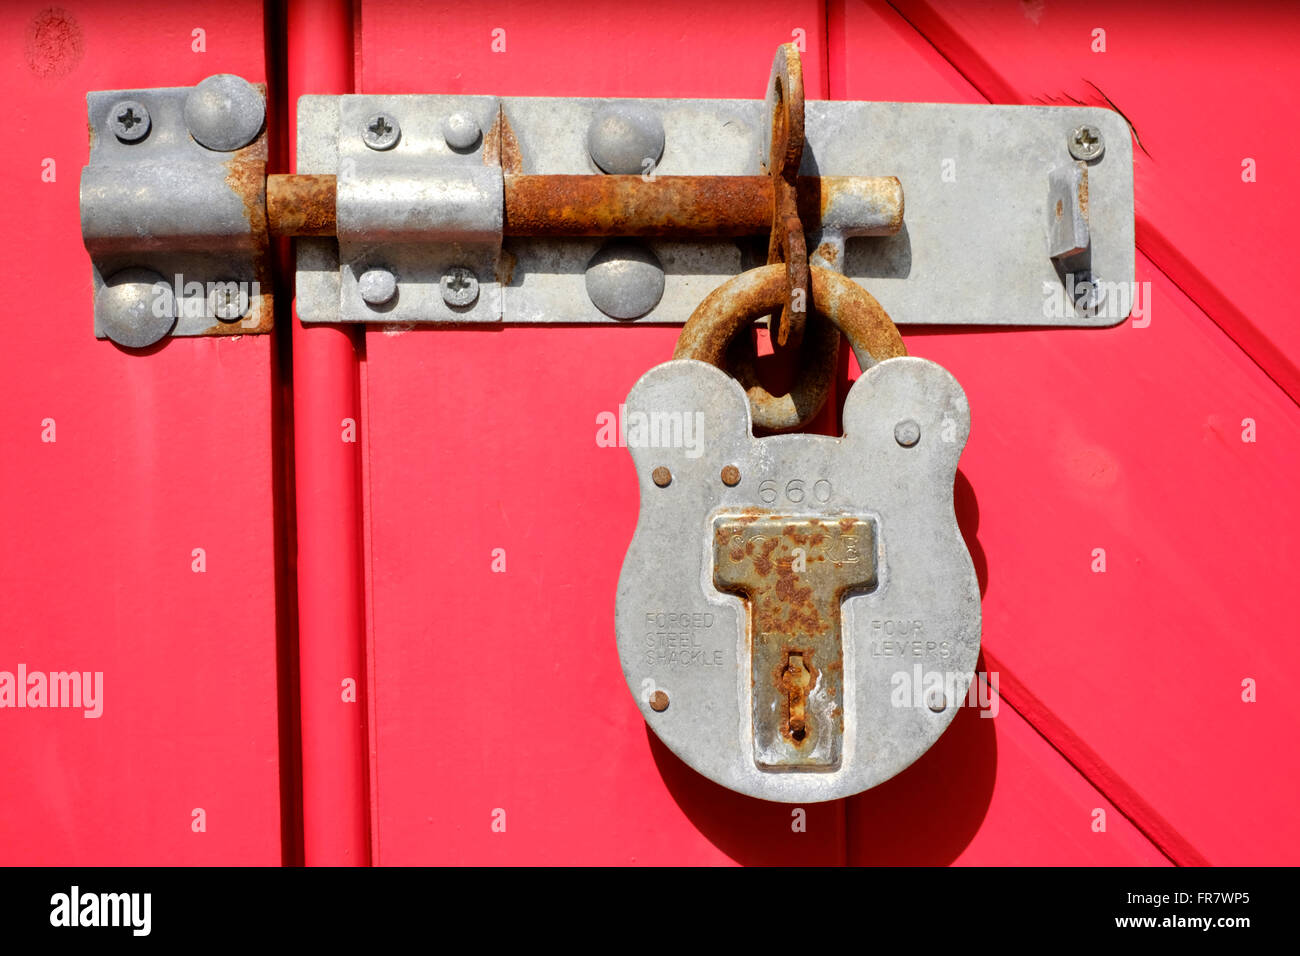 padlock on brightly red painted wooden doors uk Stock Photo